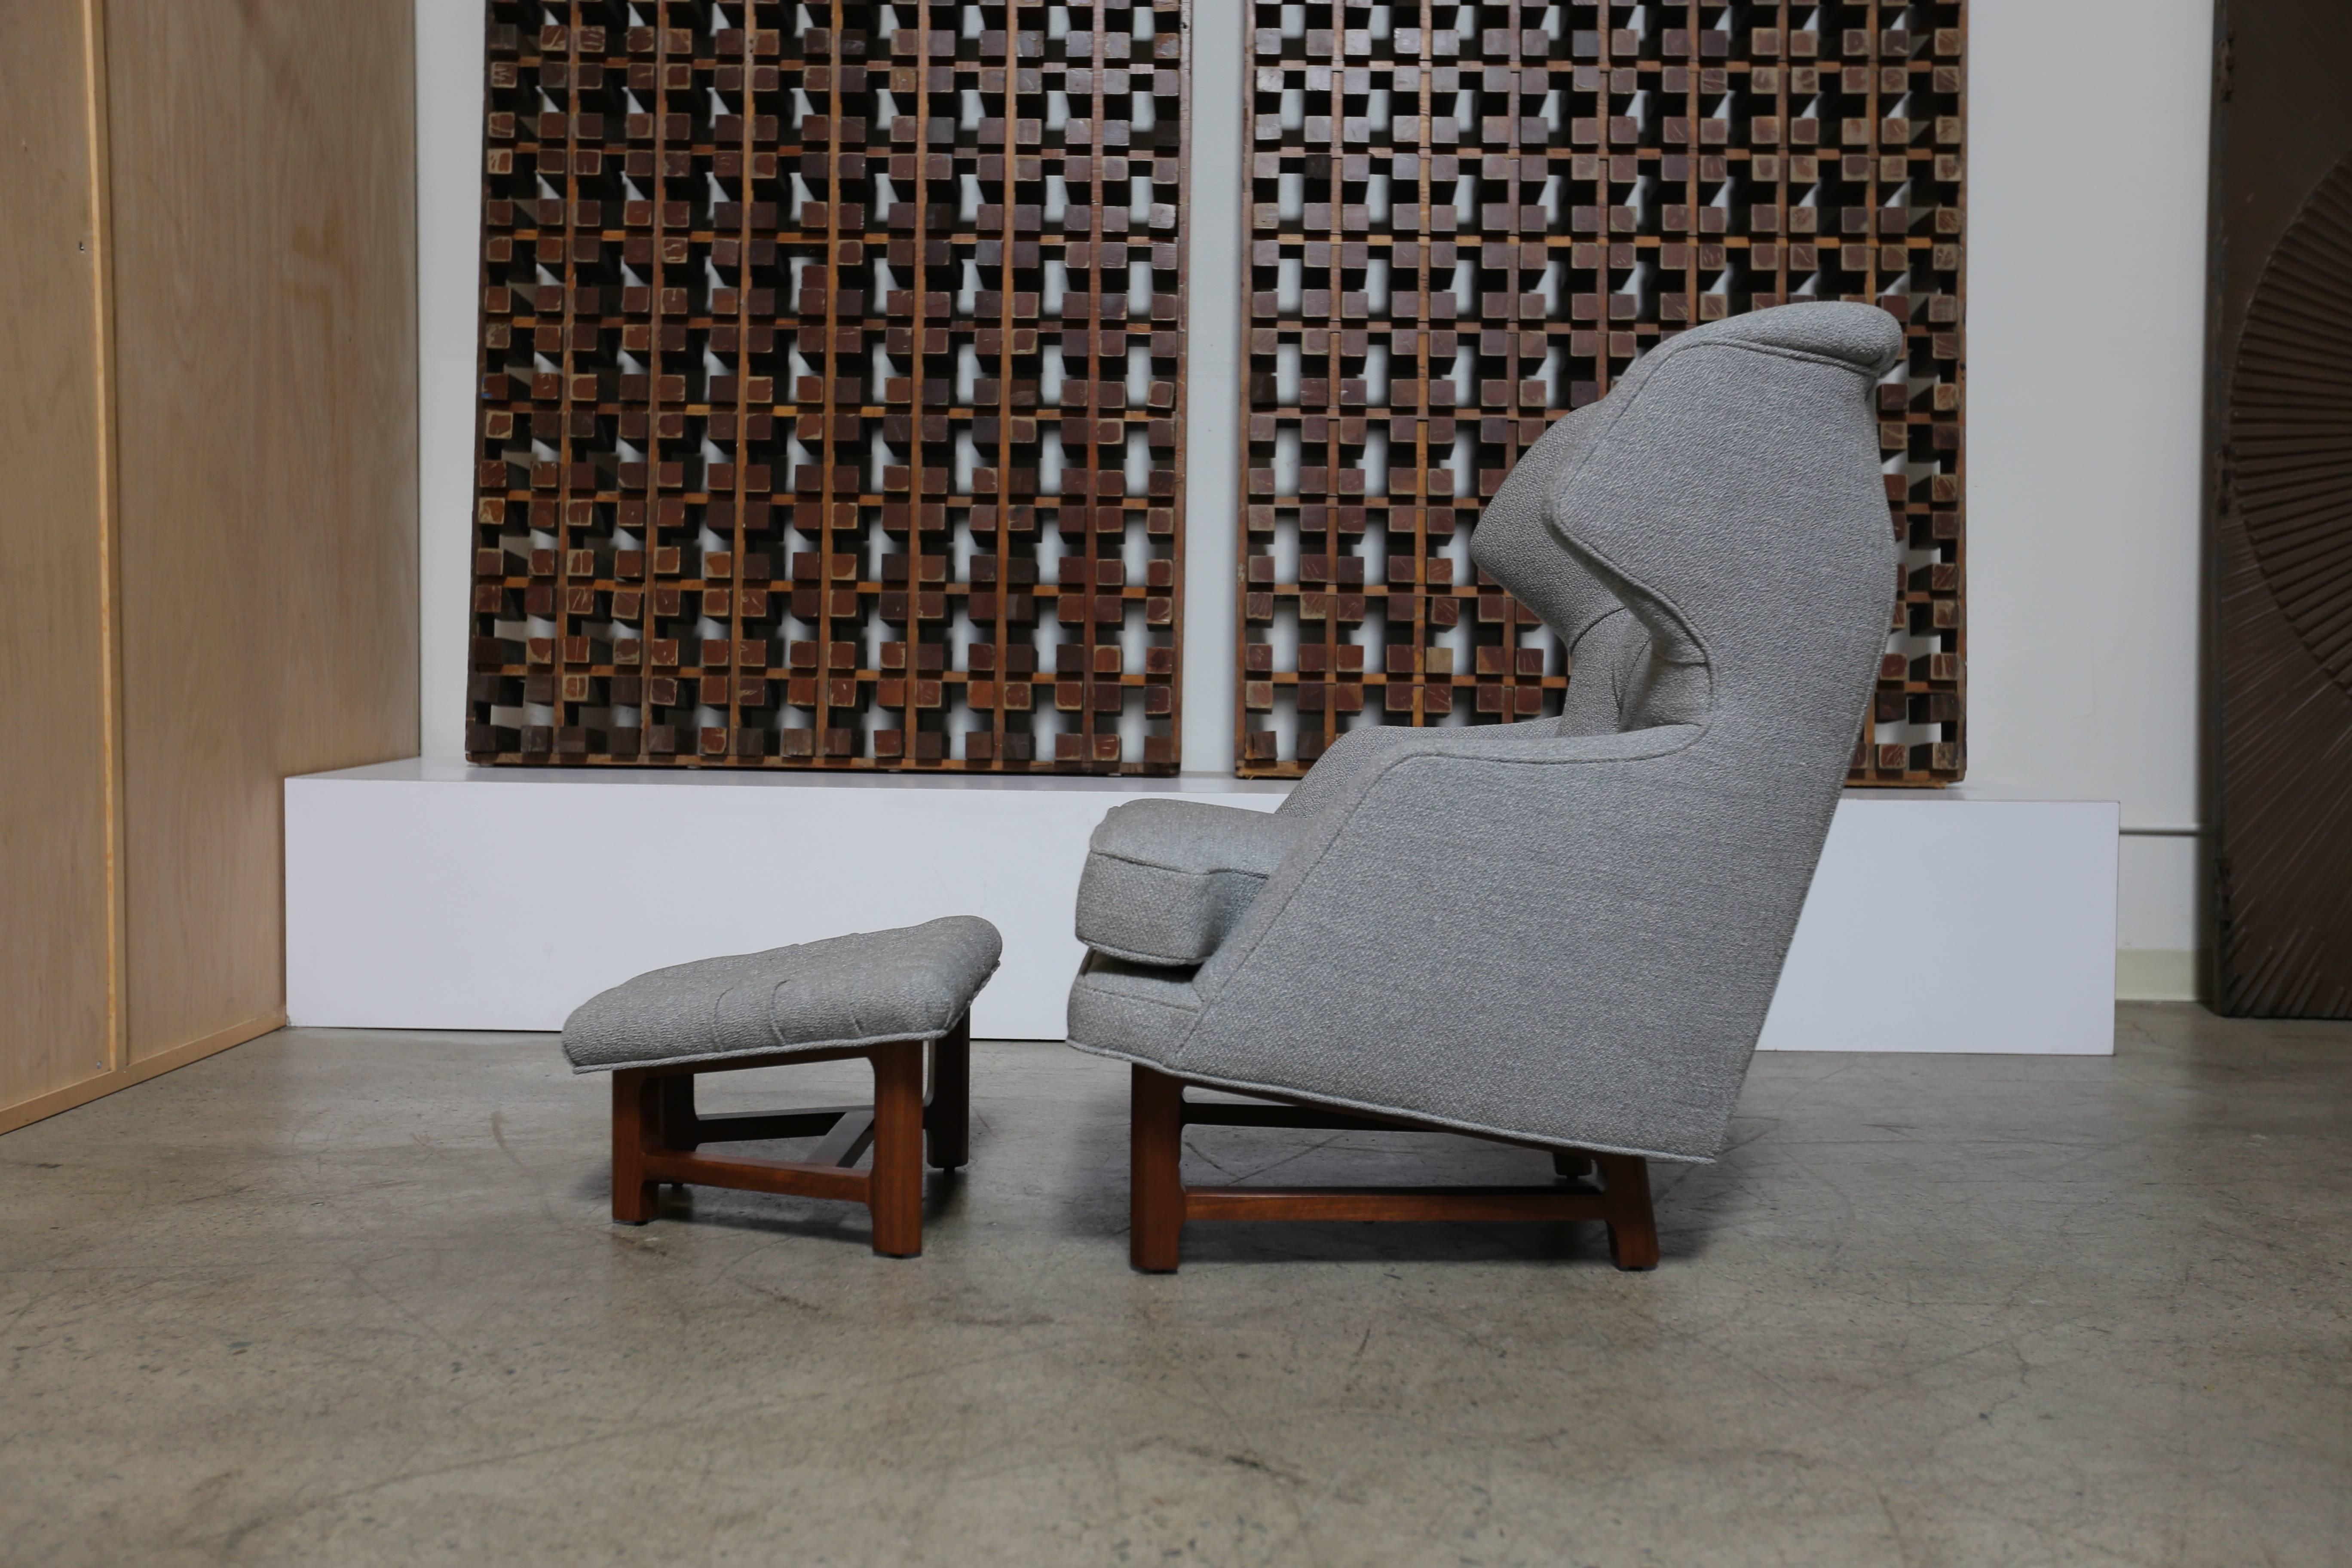 Janus wing chair and ottoman by Edward Wormley for Dunbar. This piece has been expertly restored in Pollack Berber elephant grey fabric. 

The ottoman measures: 23.5